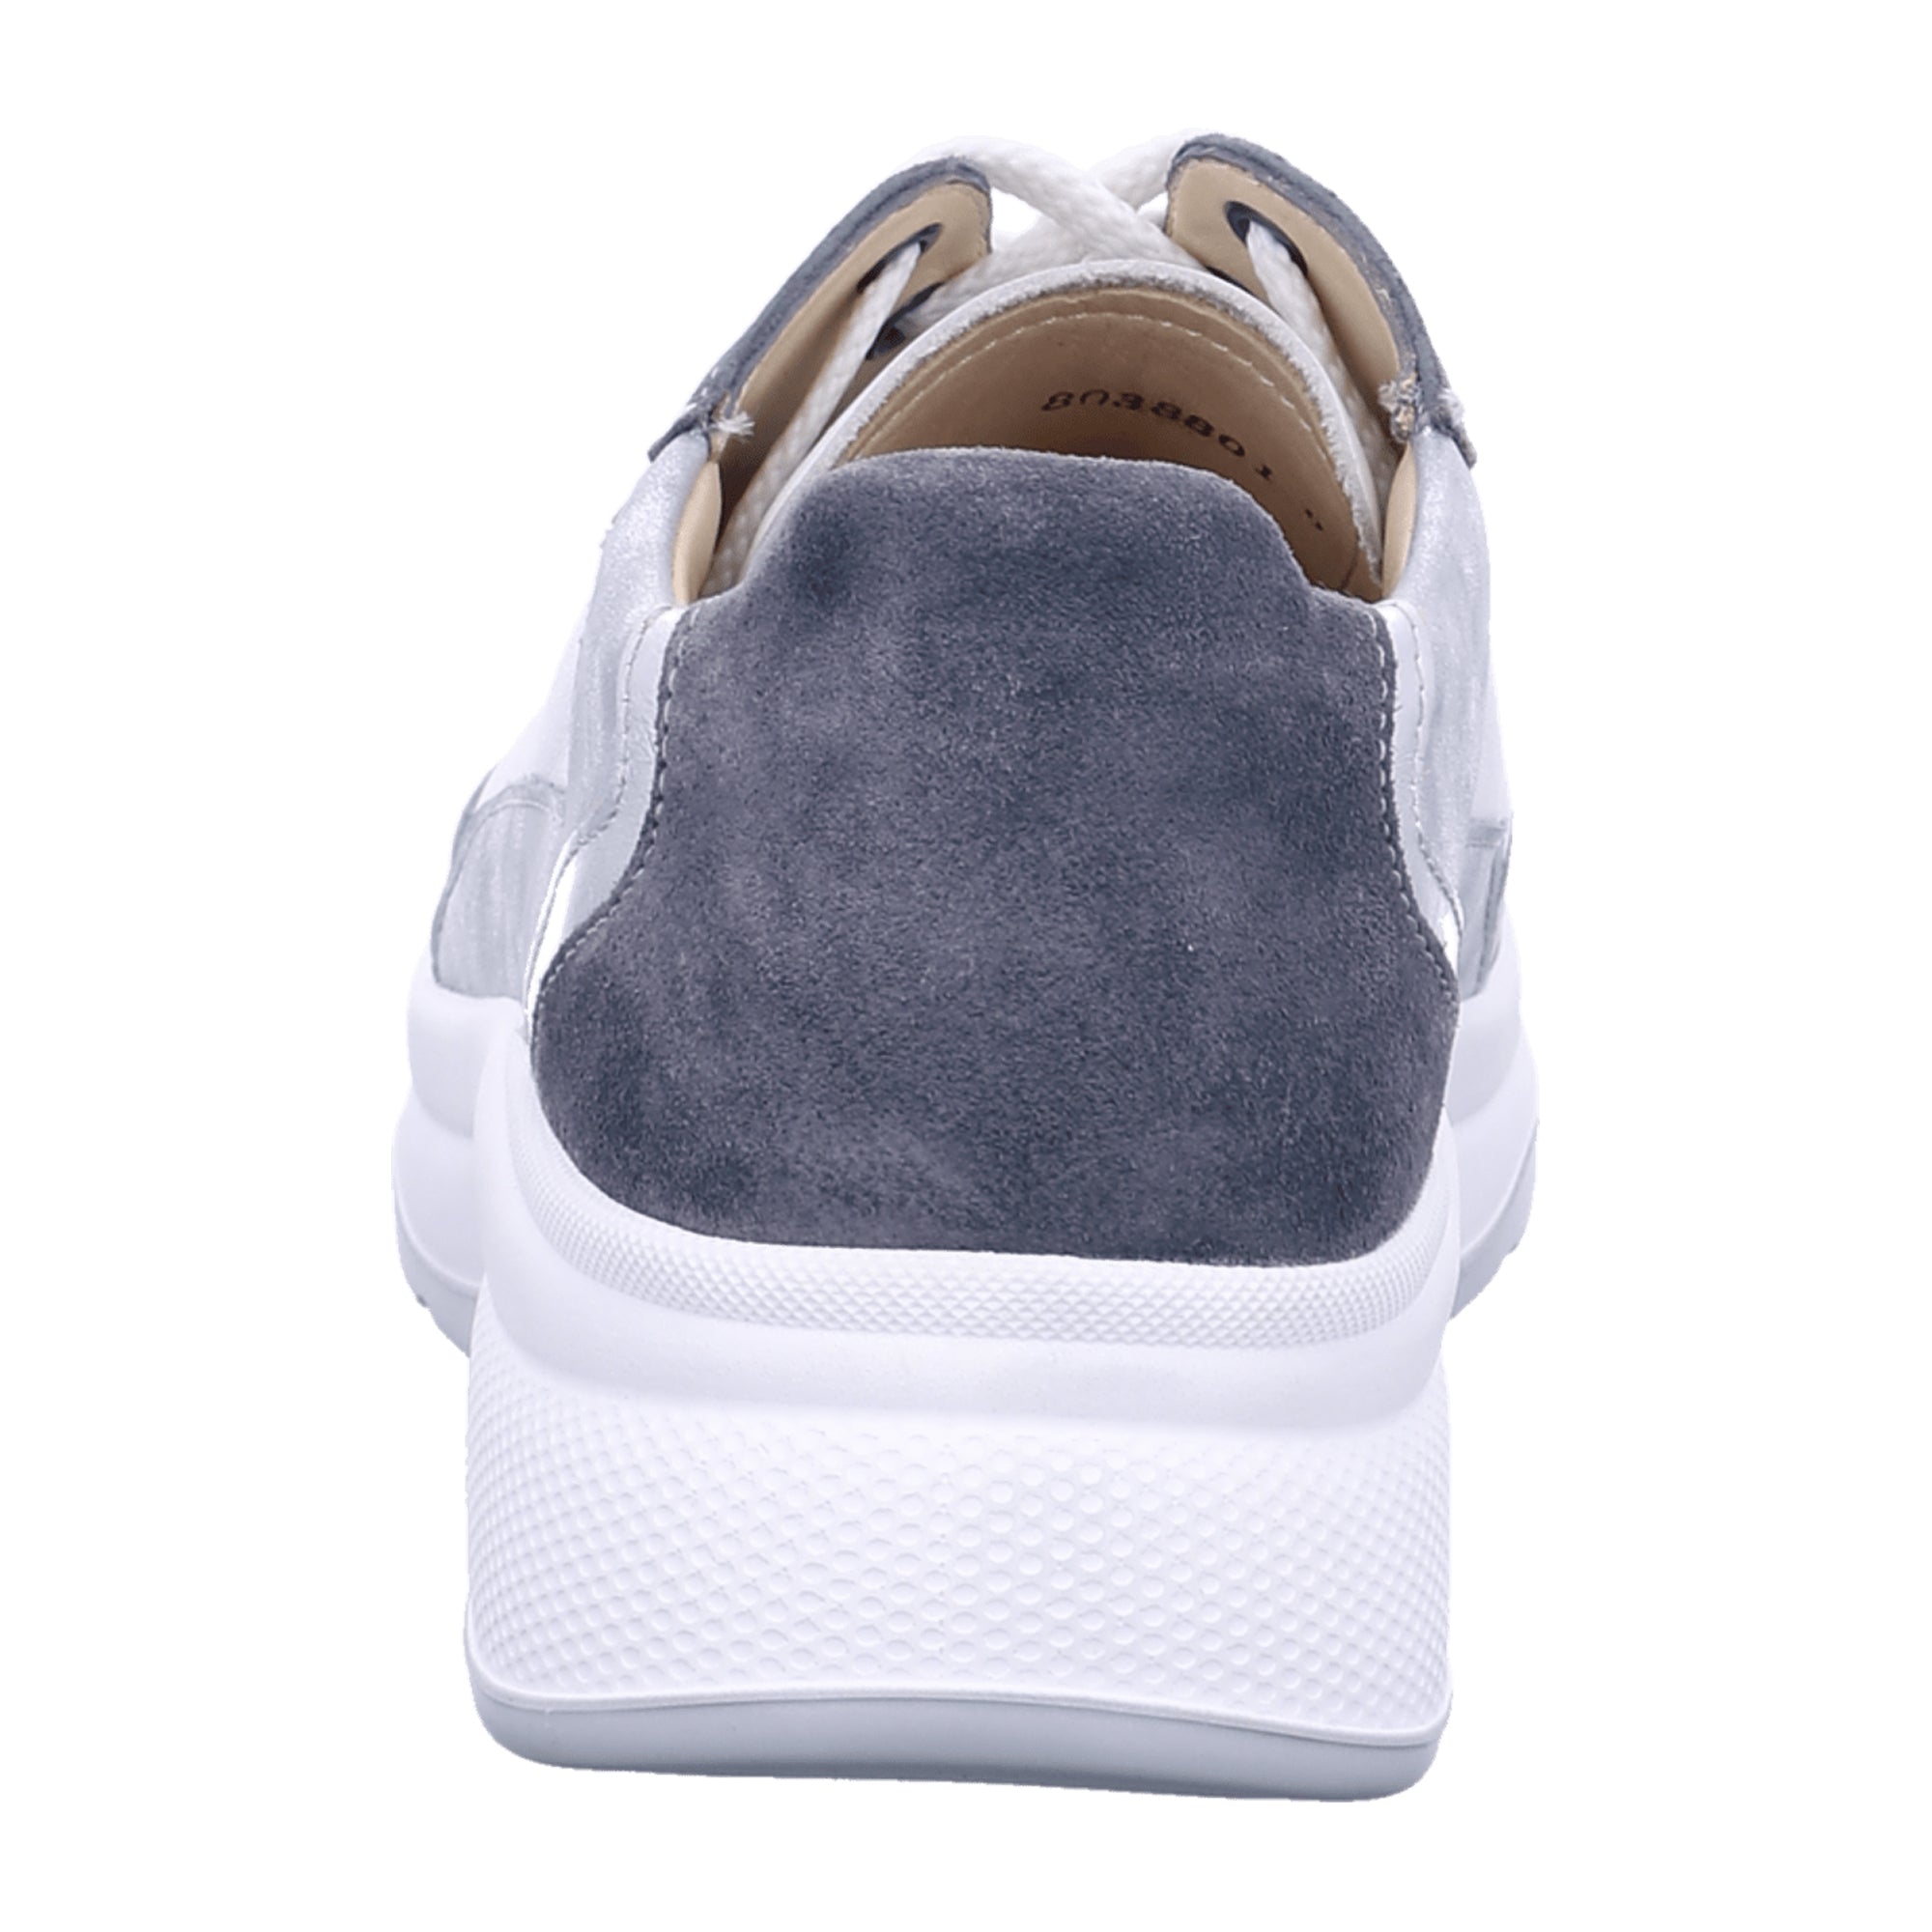 Finn Comfort Piccadilly Women's Comfort Sneakers White/Gray/Silver, Leather Lace-Up Designed for Optimal Fit